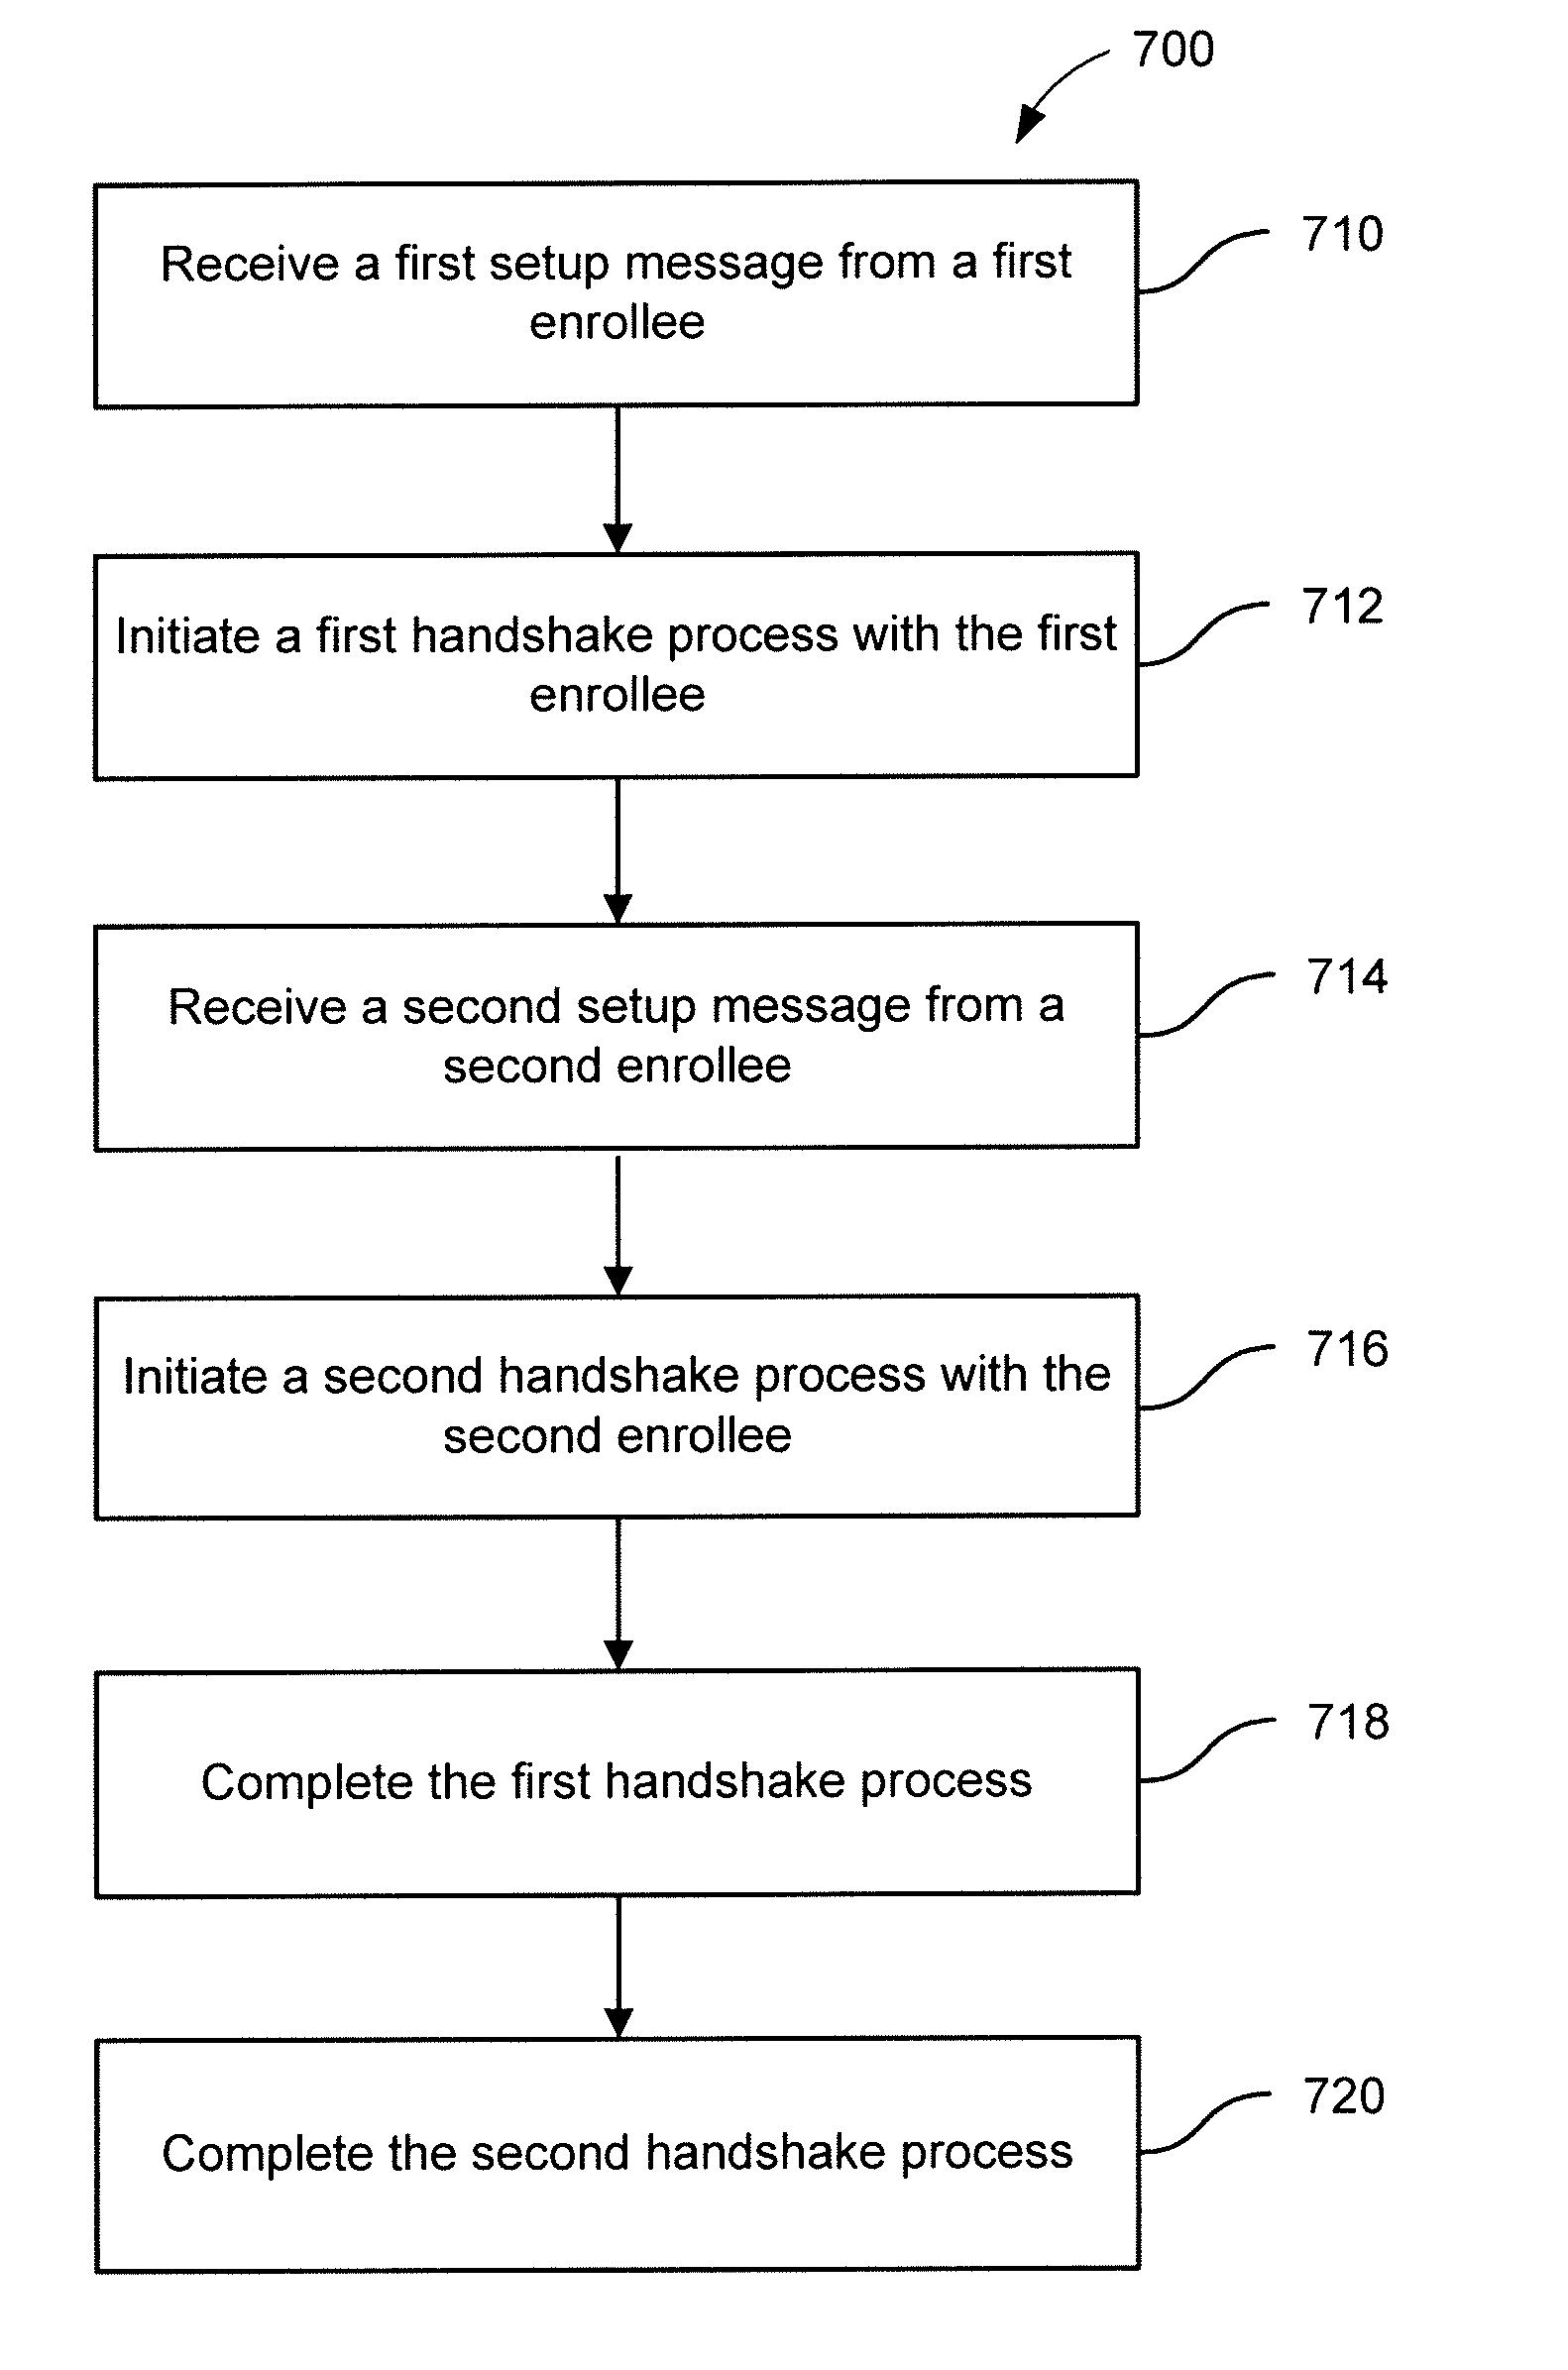 Establishment of ad-hoc networks between multiple devices